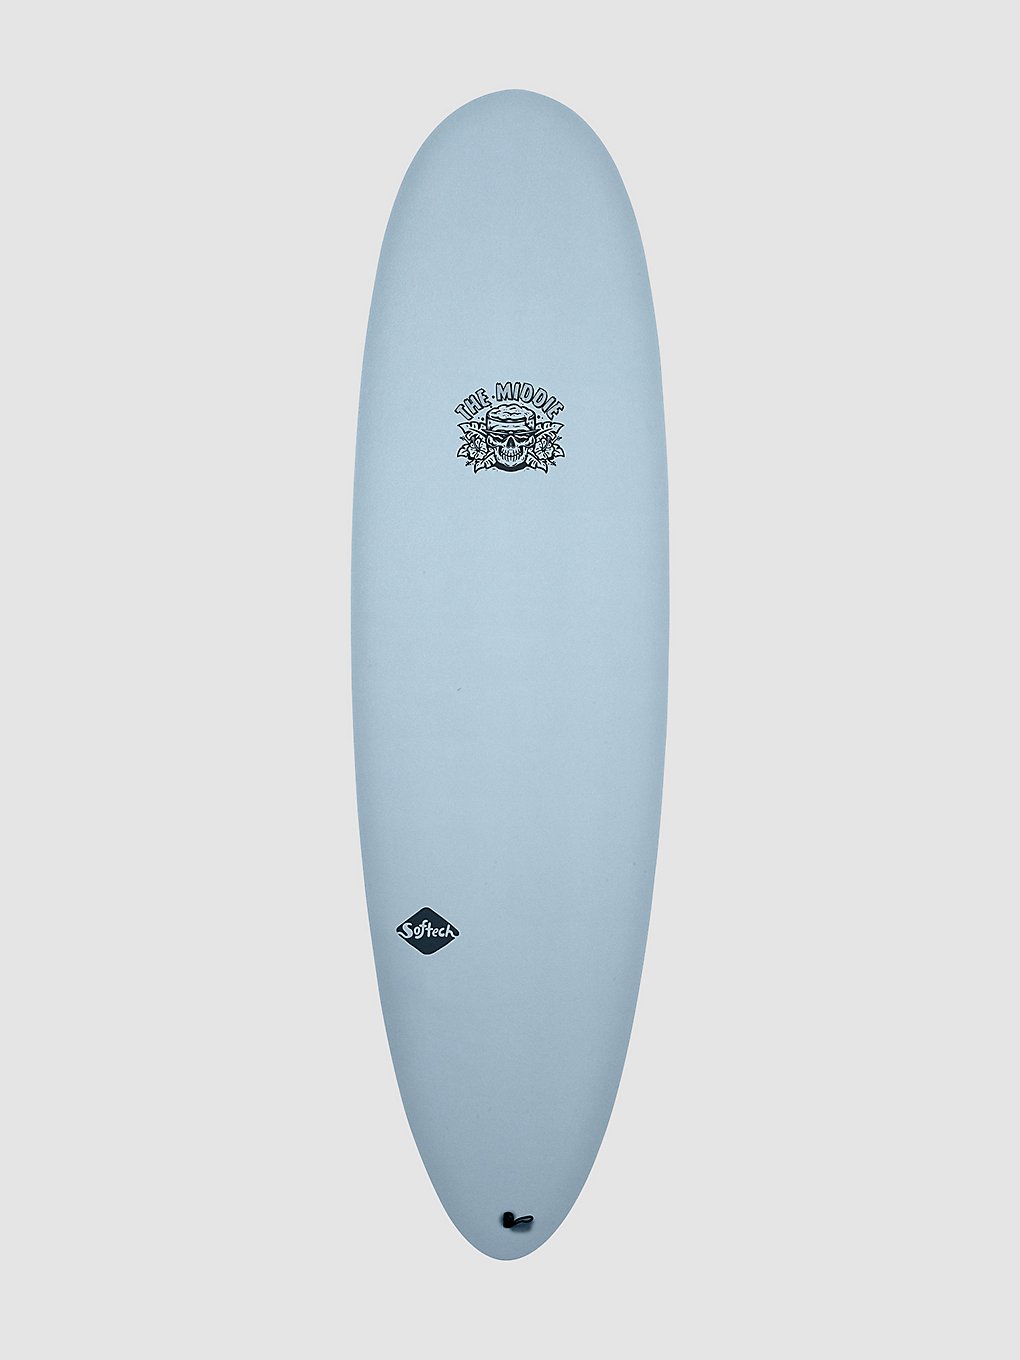 Softech The Middie 6'10 Surfboard patroon